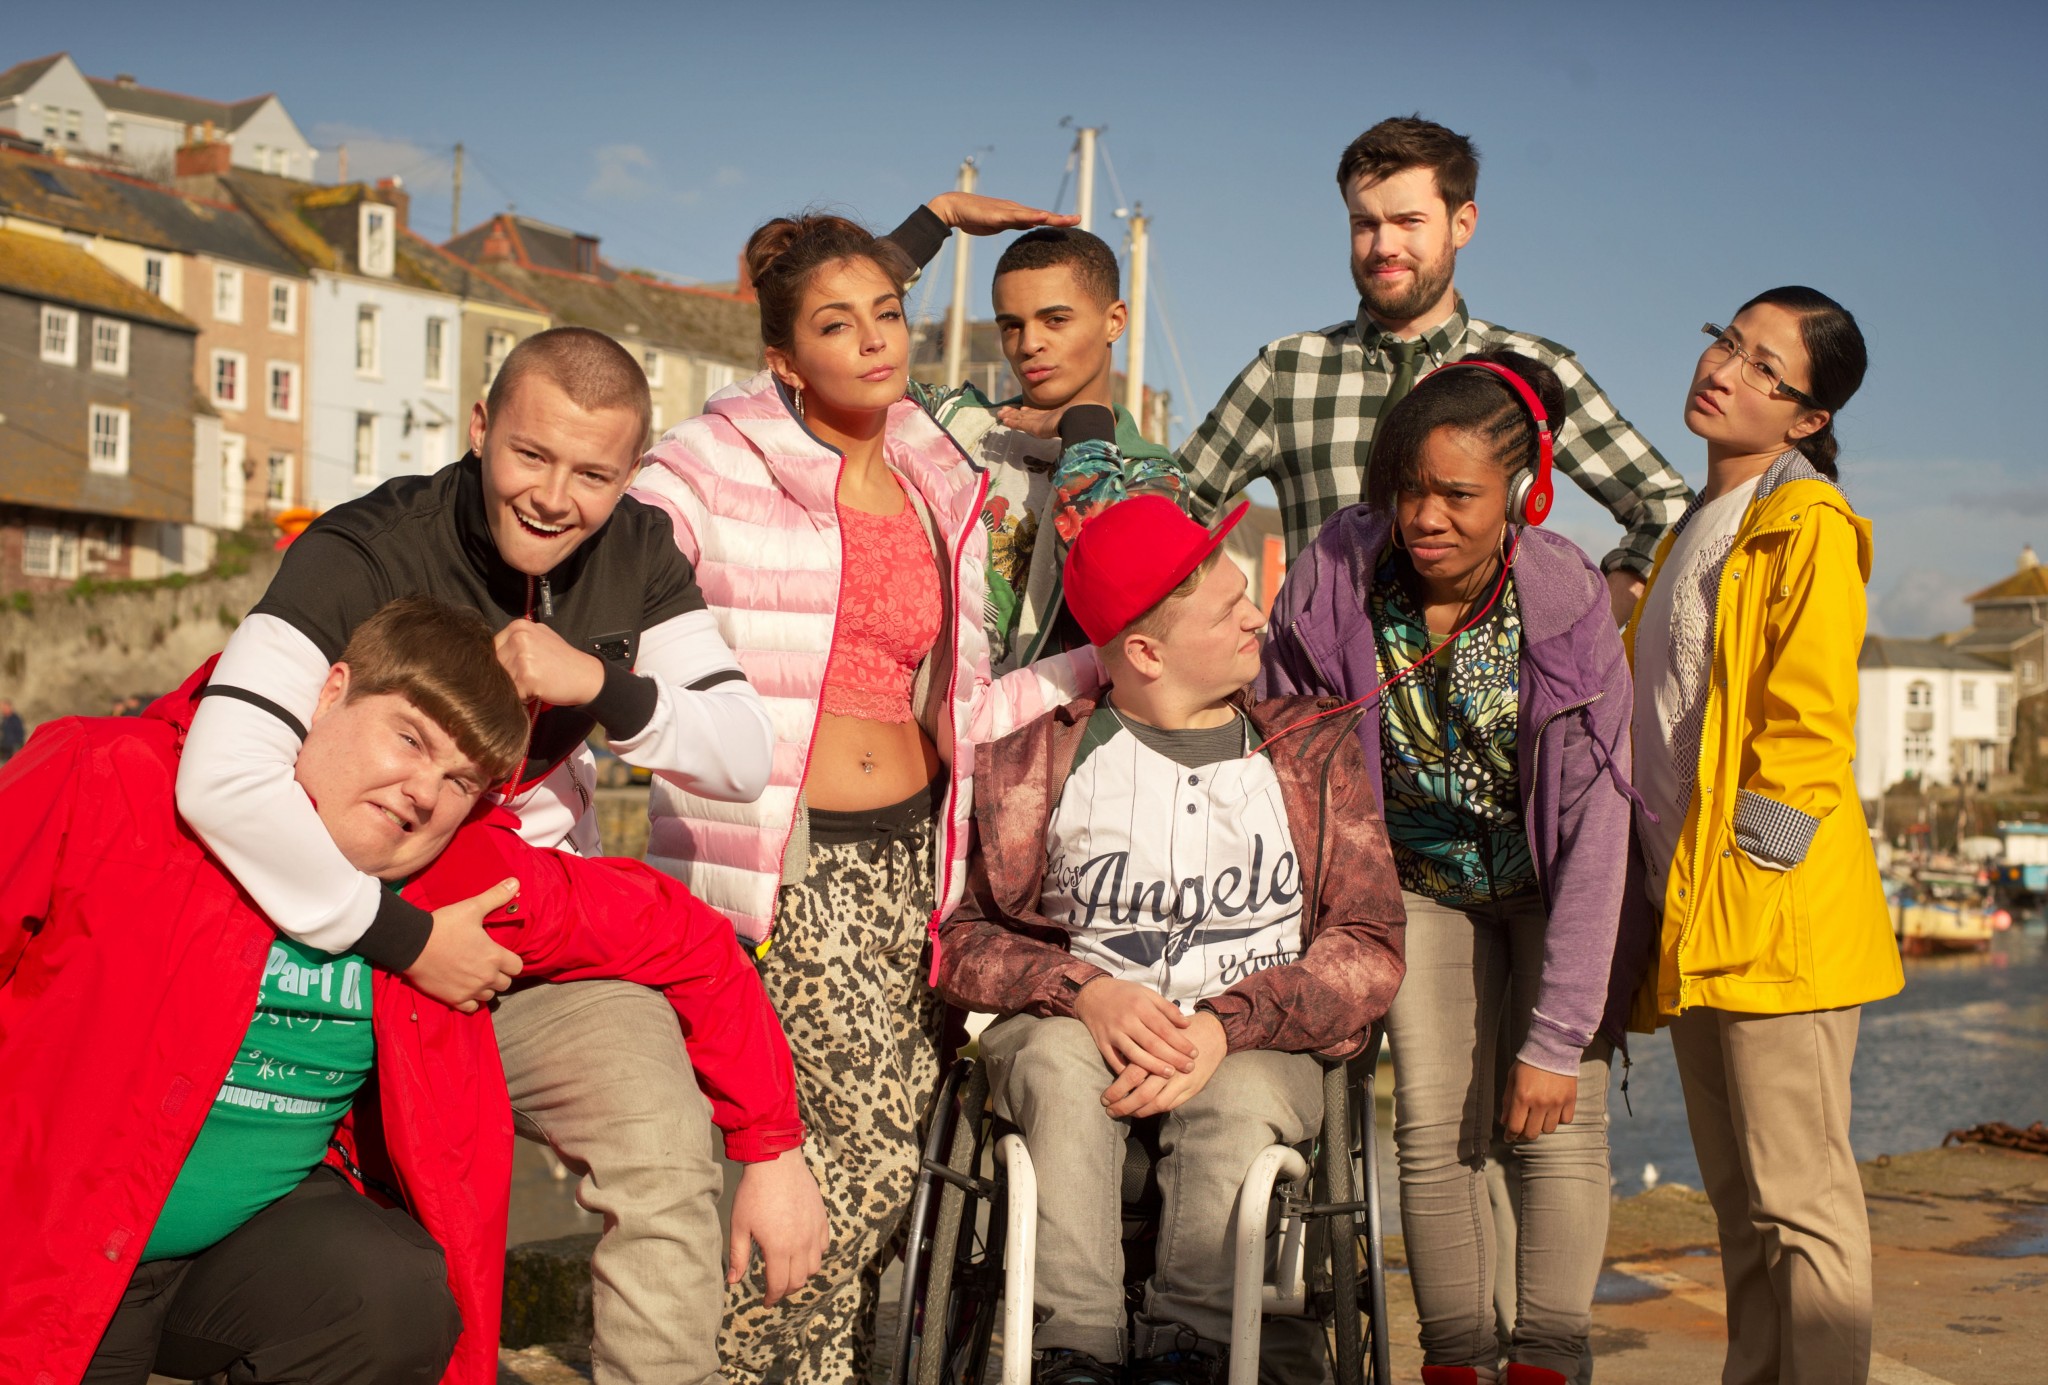 The-Bad-Education-Movie-first-look-image